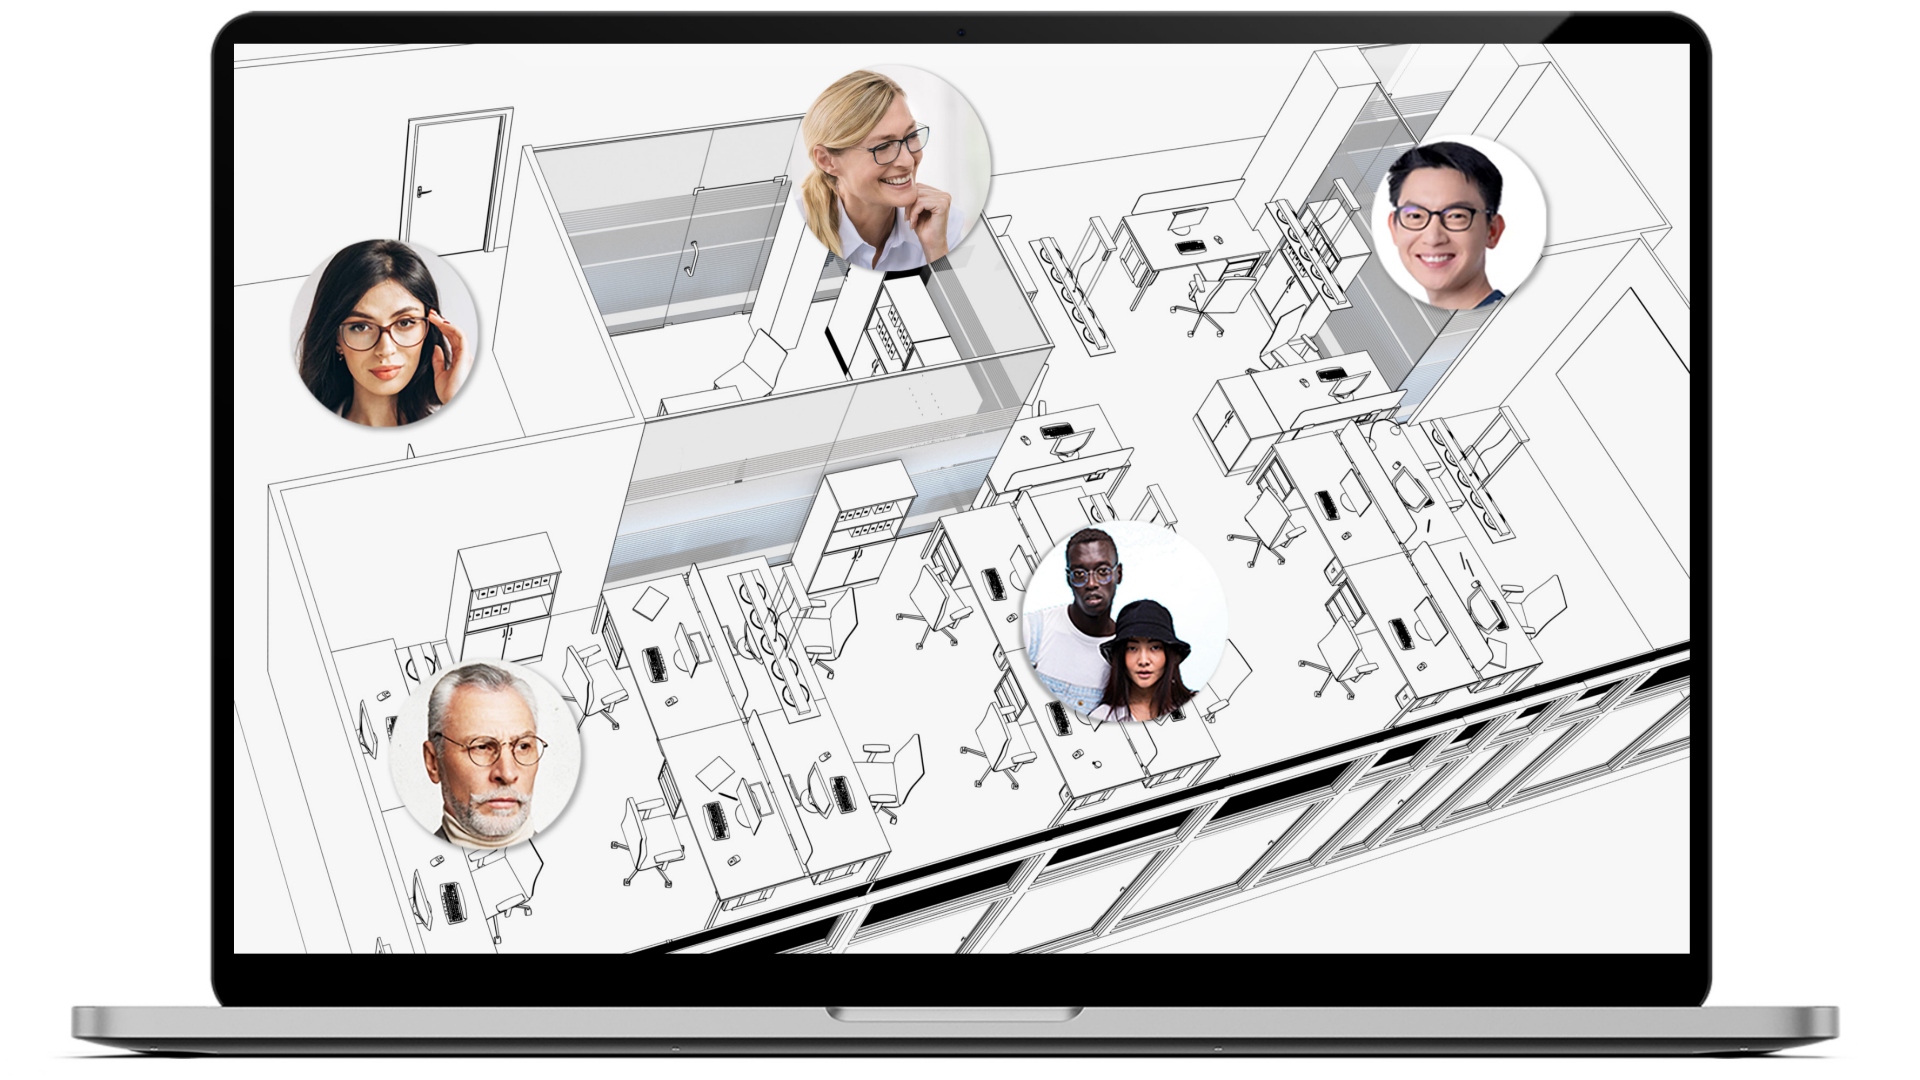 Laptop with an office layout drawing on the screen, showing where different co-workers are located. Each area has a small round image of different people, all wearing ZEISS Office glasses.